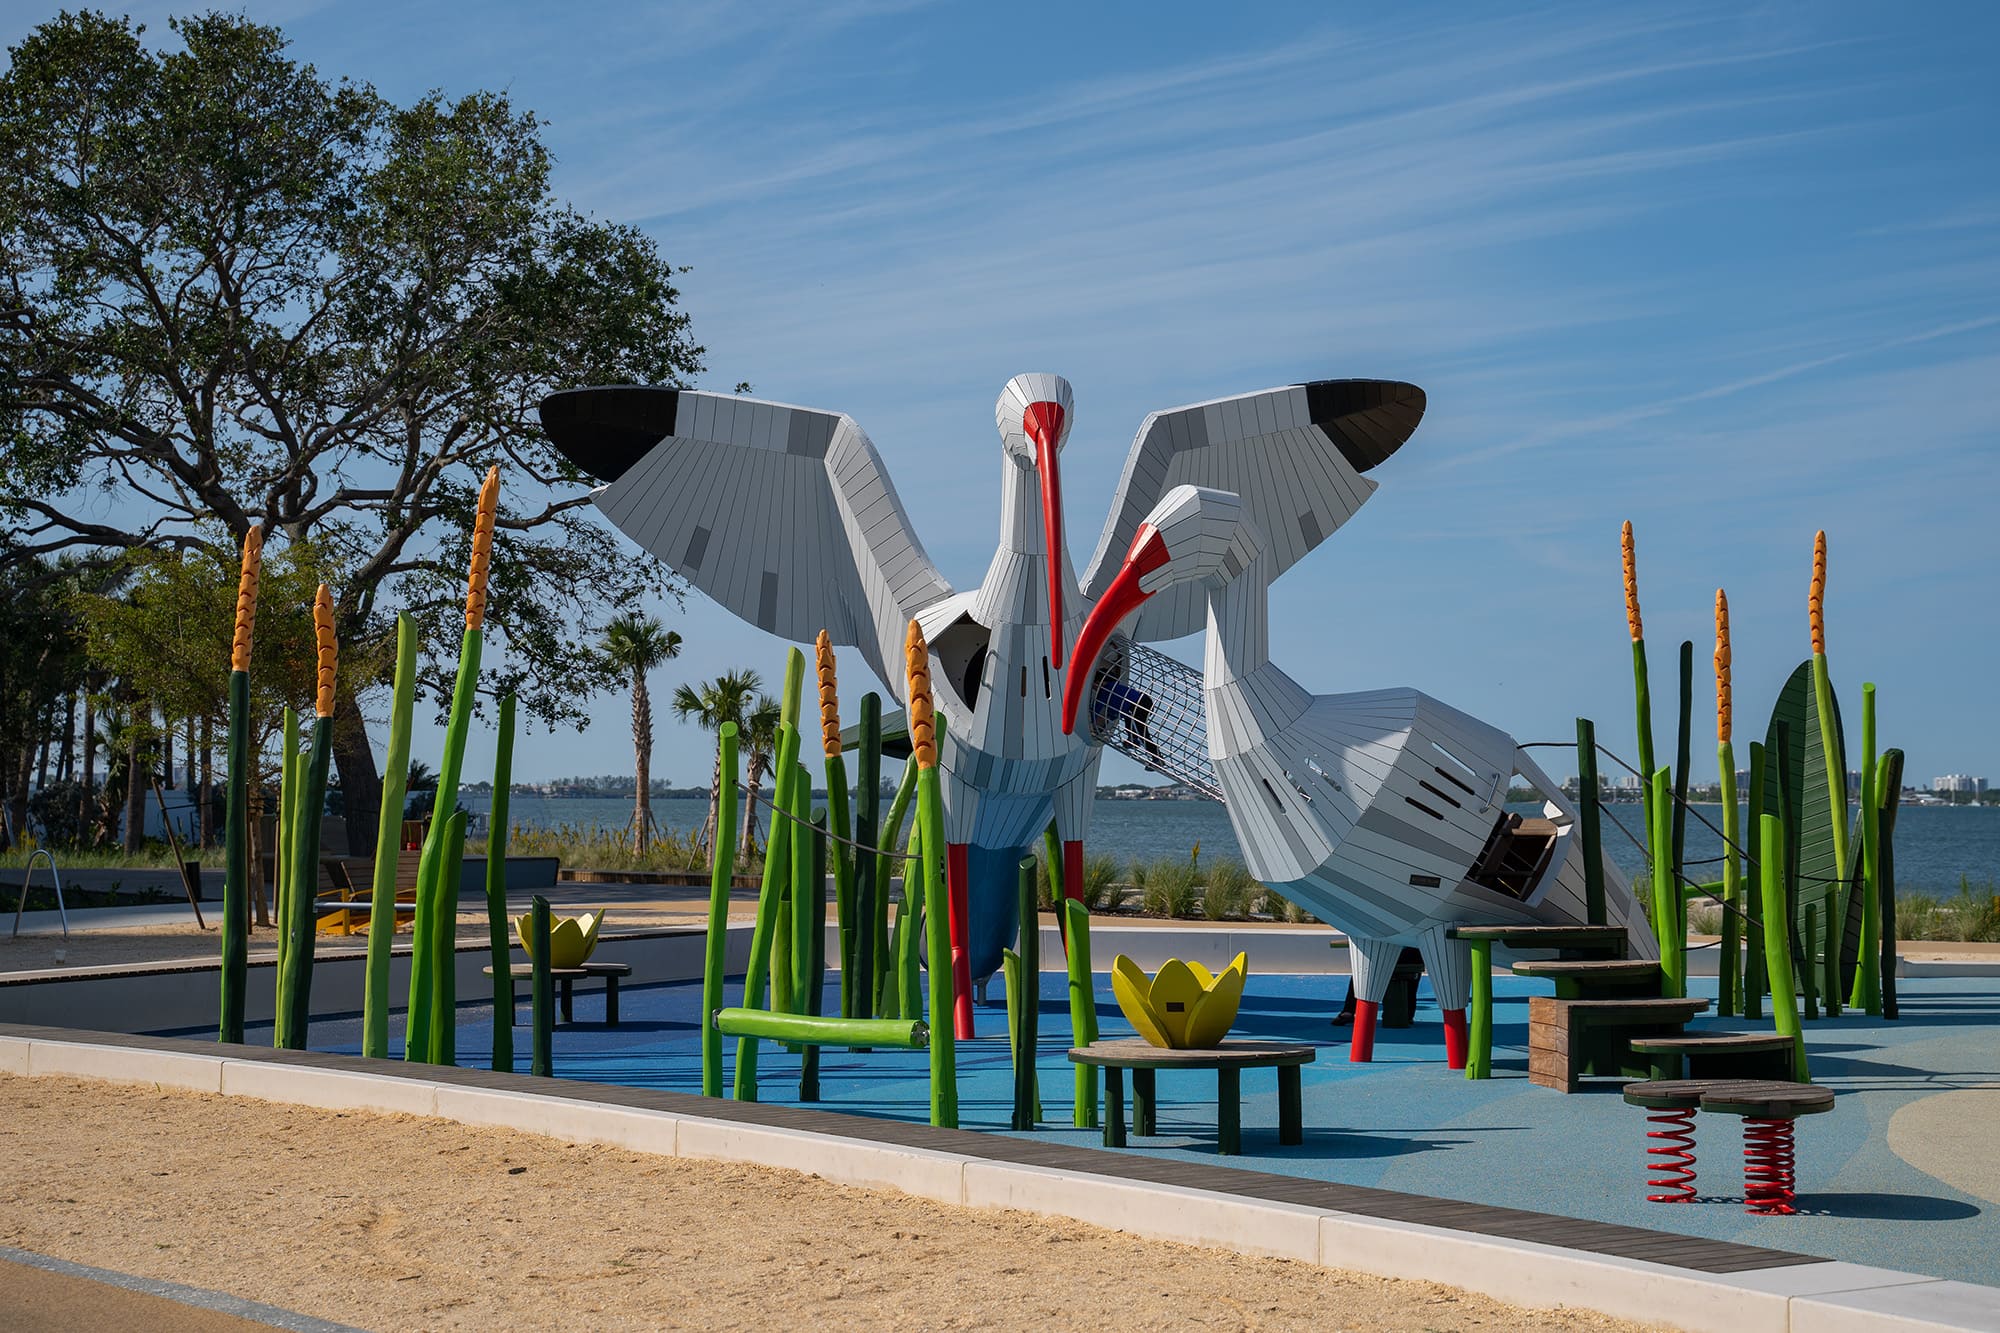 Playground with statues of cranes